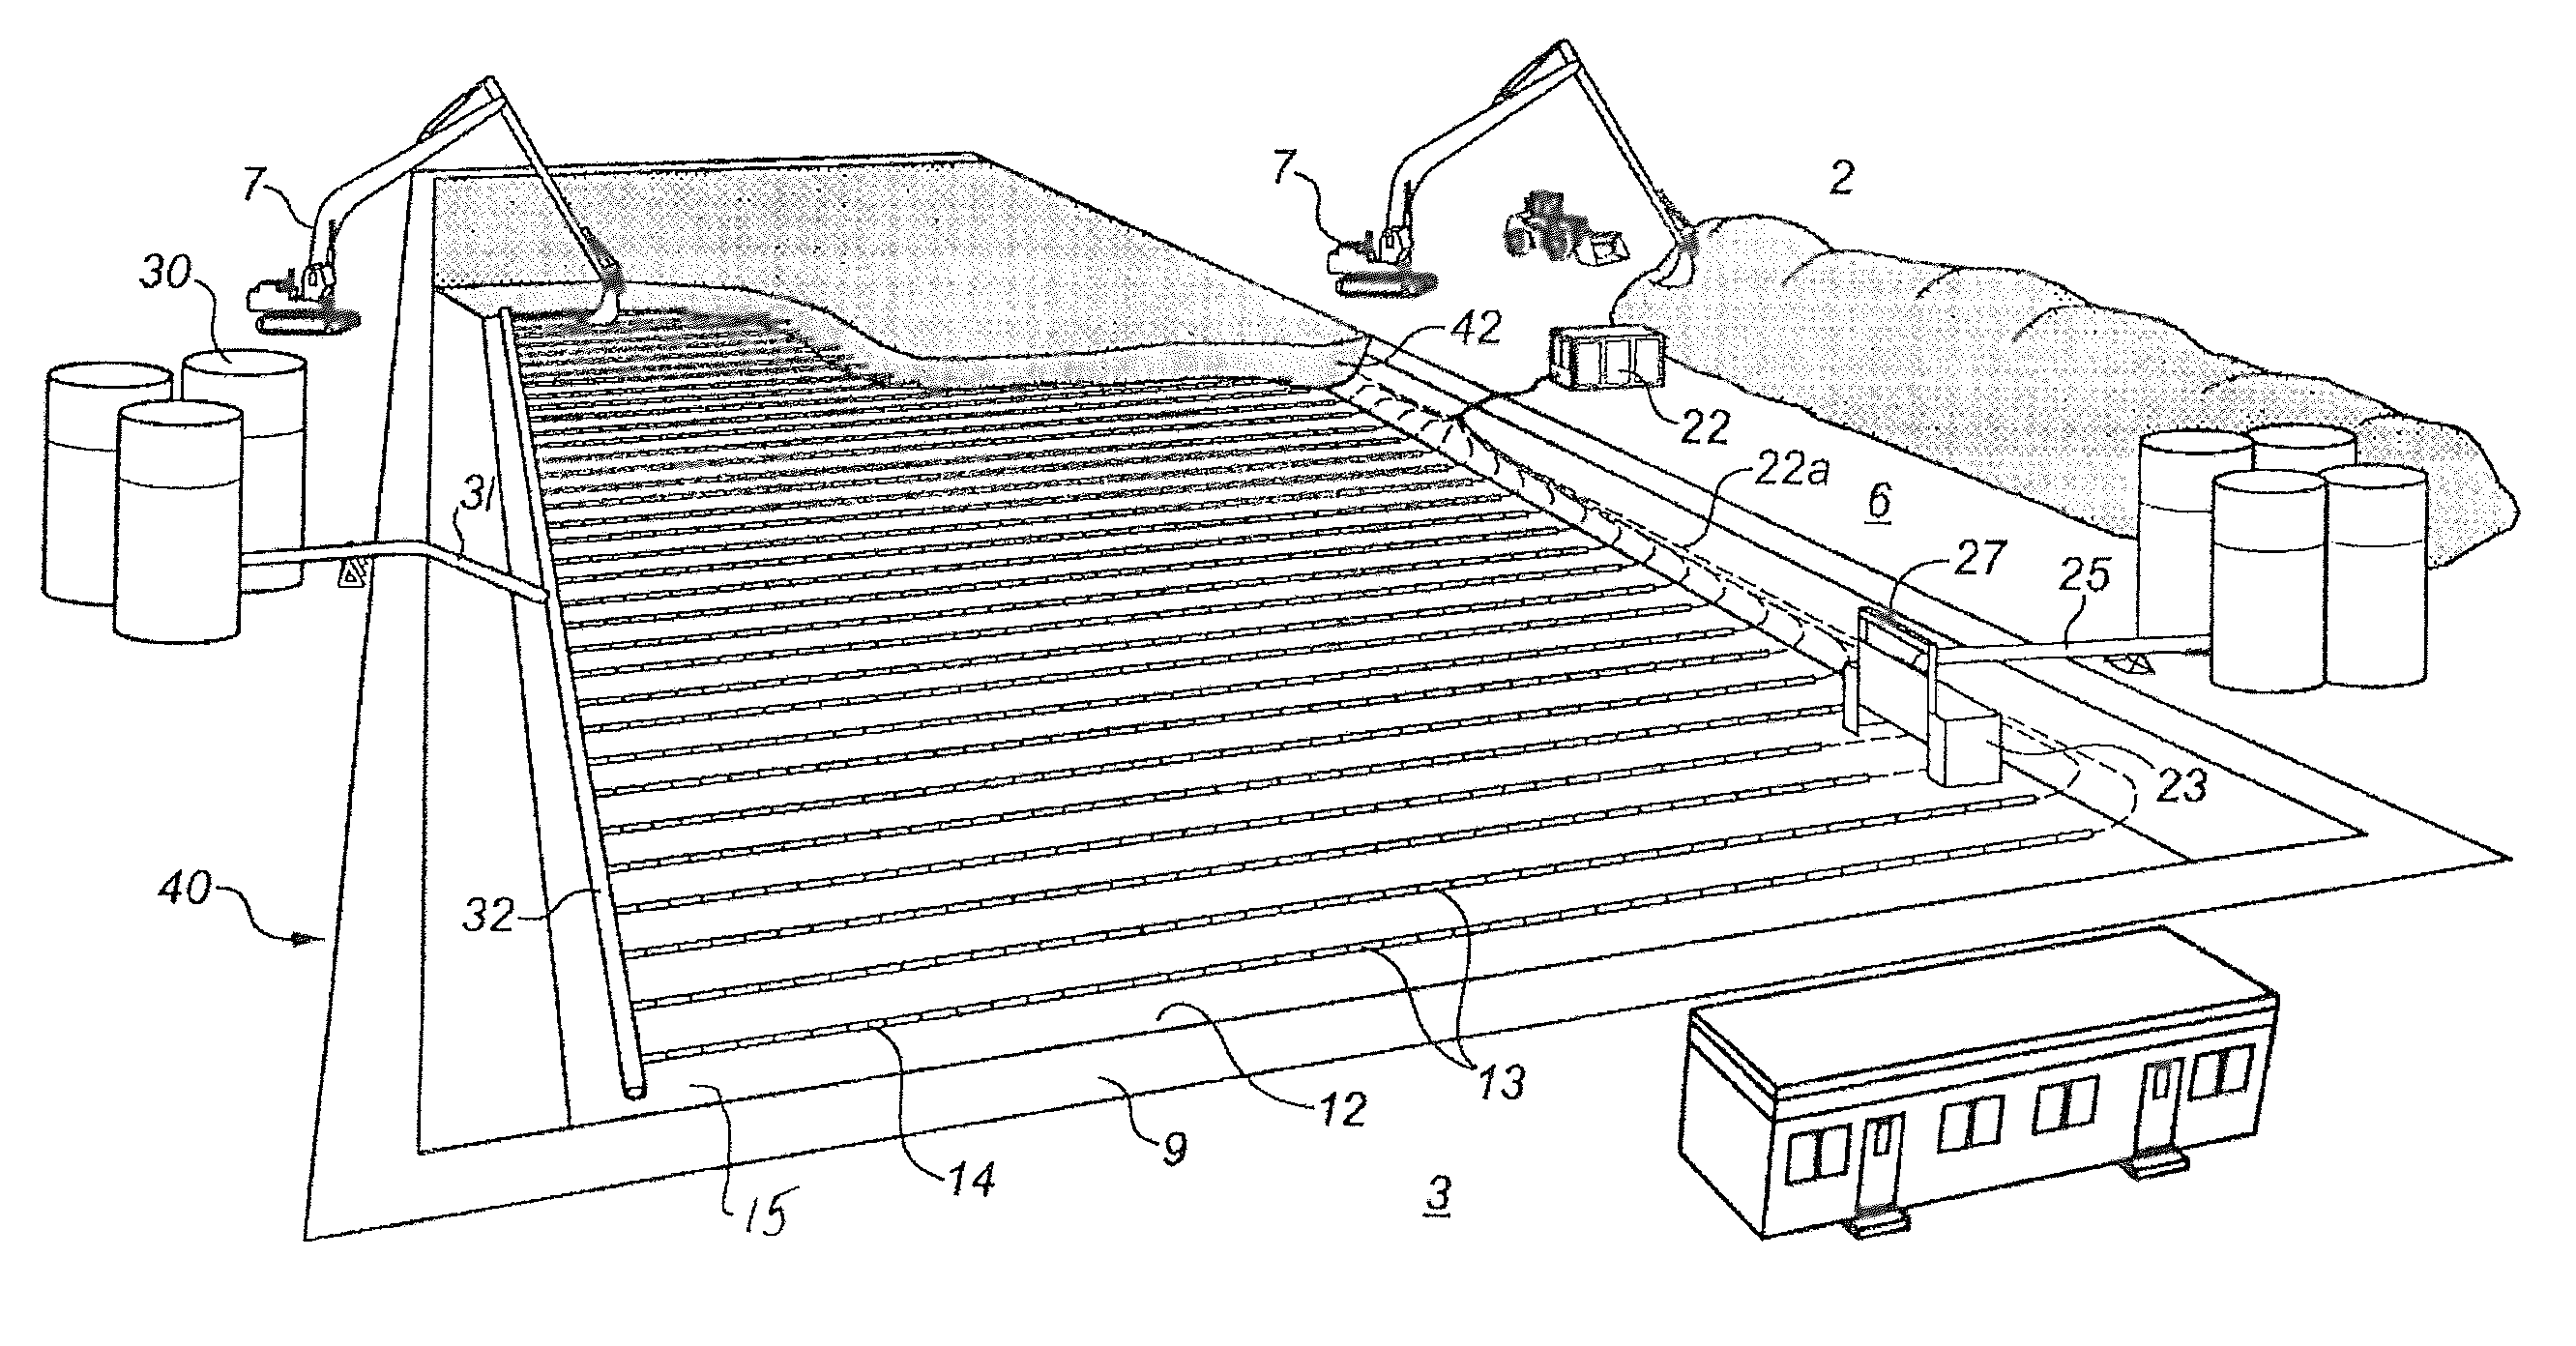 Method for the remediation of contaminated soil